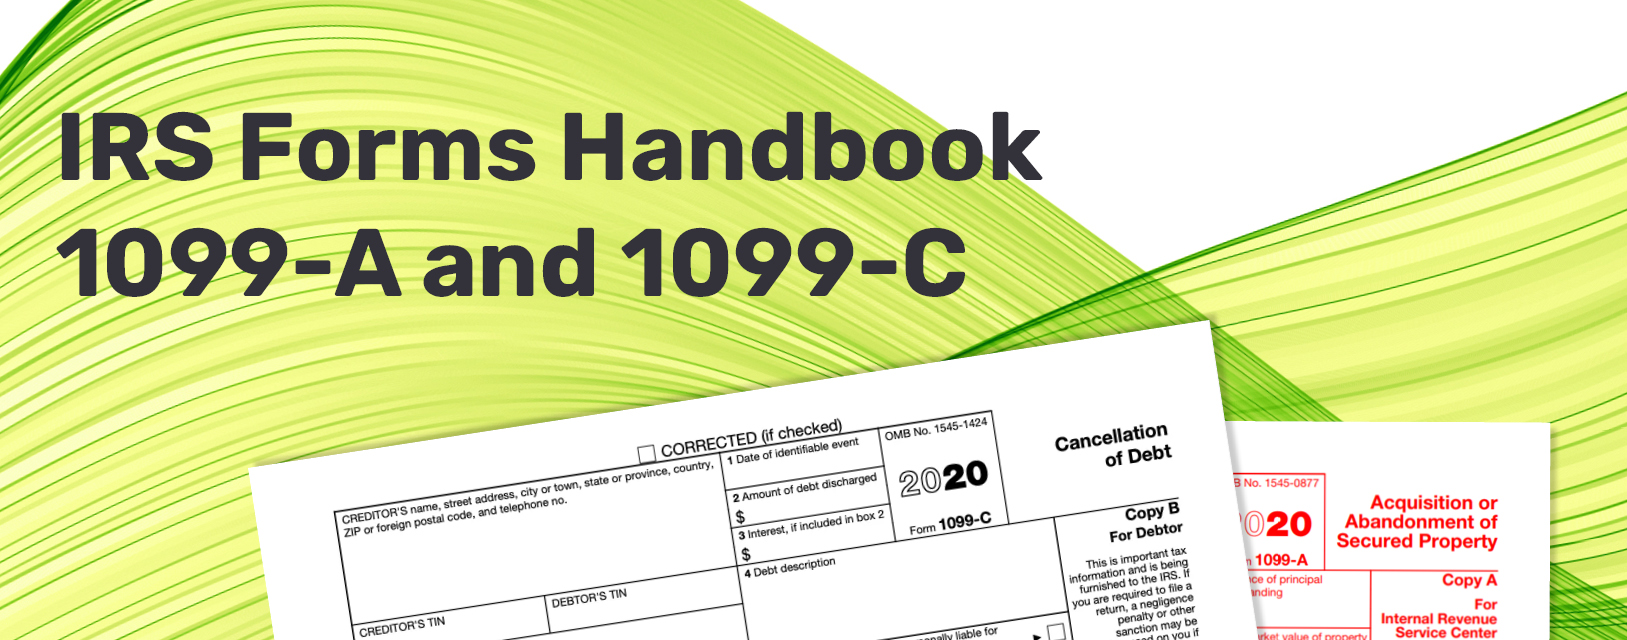 IRS Forms Handbook 1099-A and 1099-C